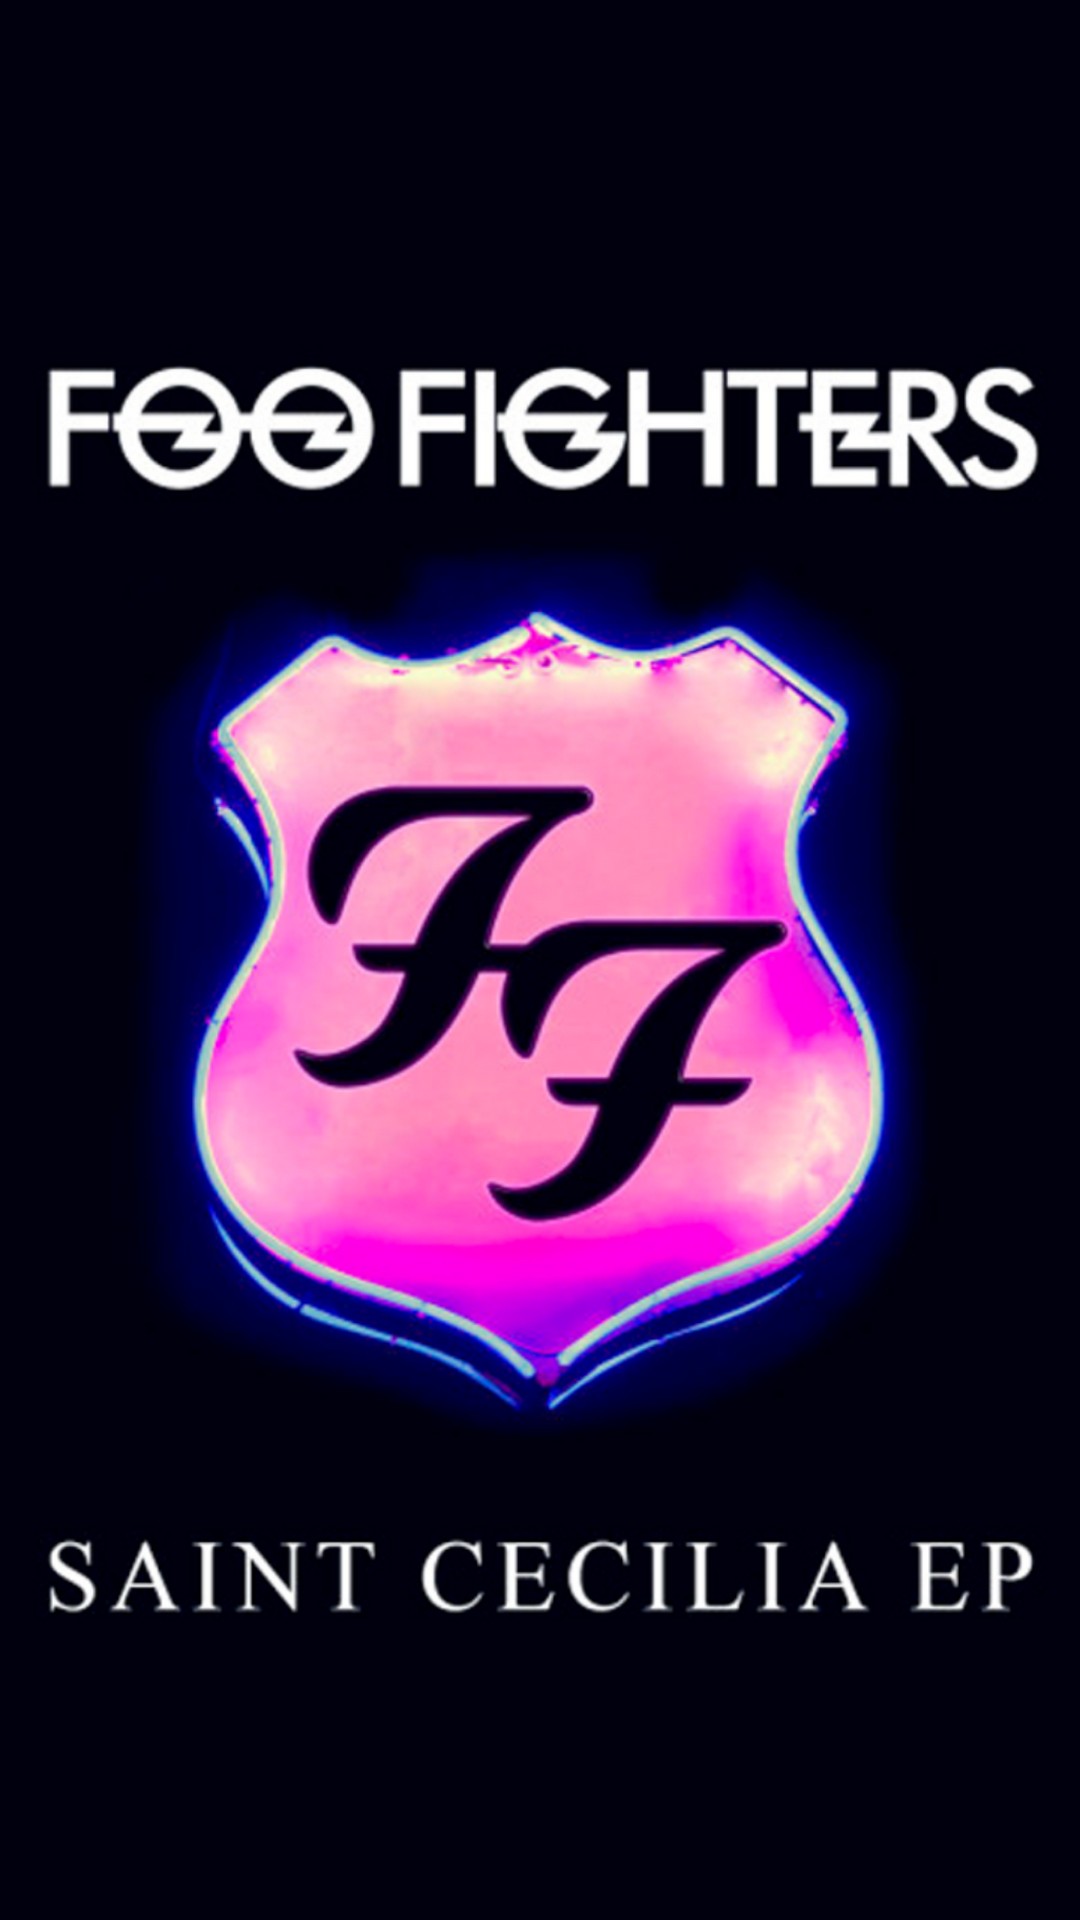 Foo Fighters Android Wallpaper